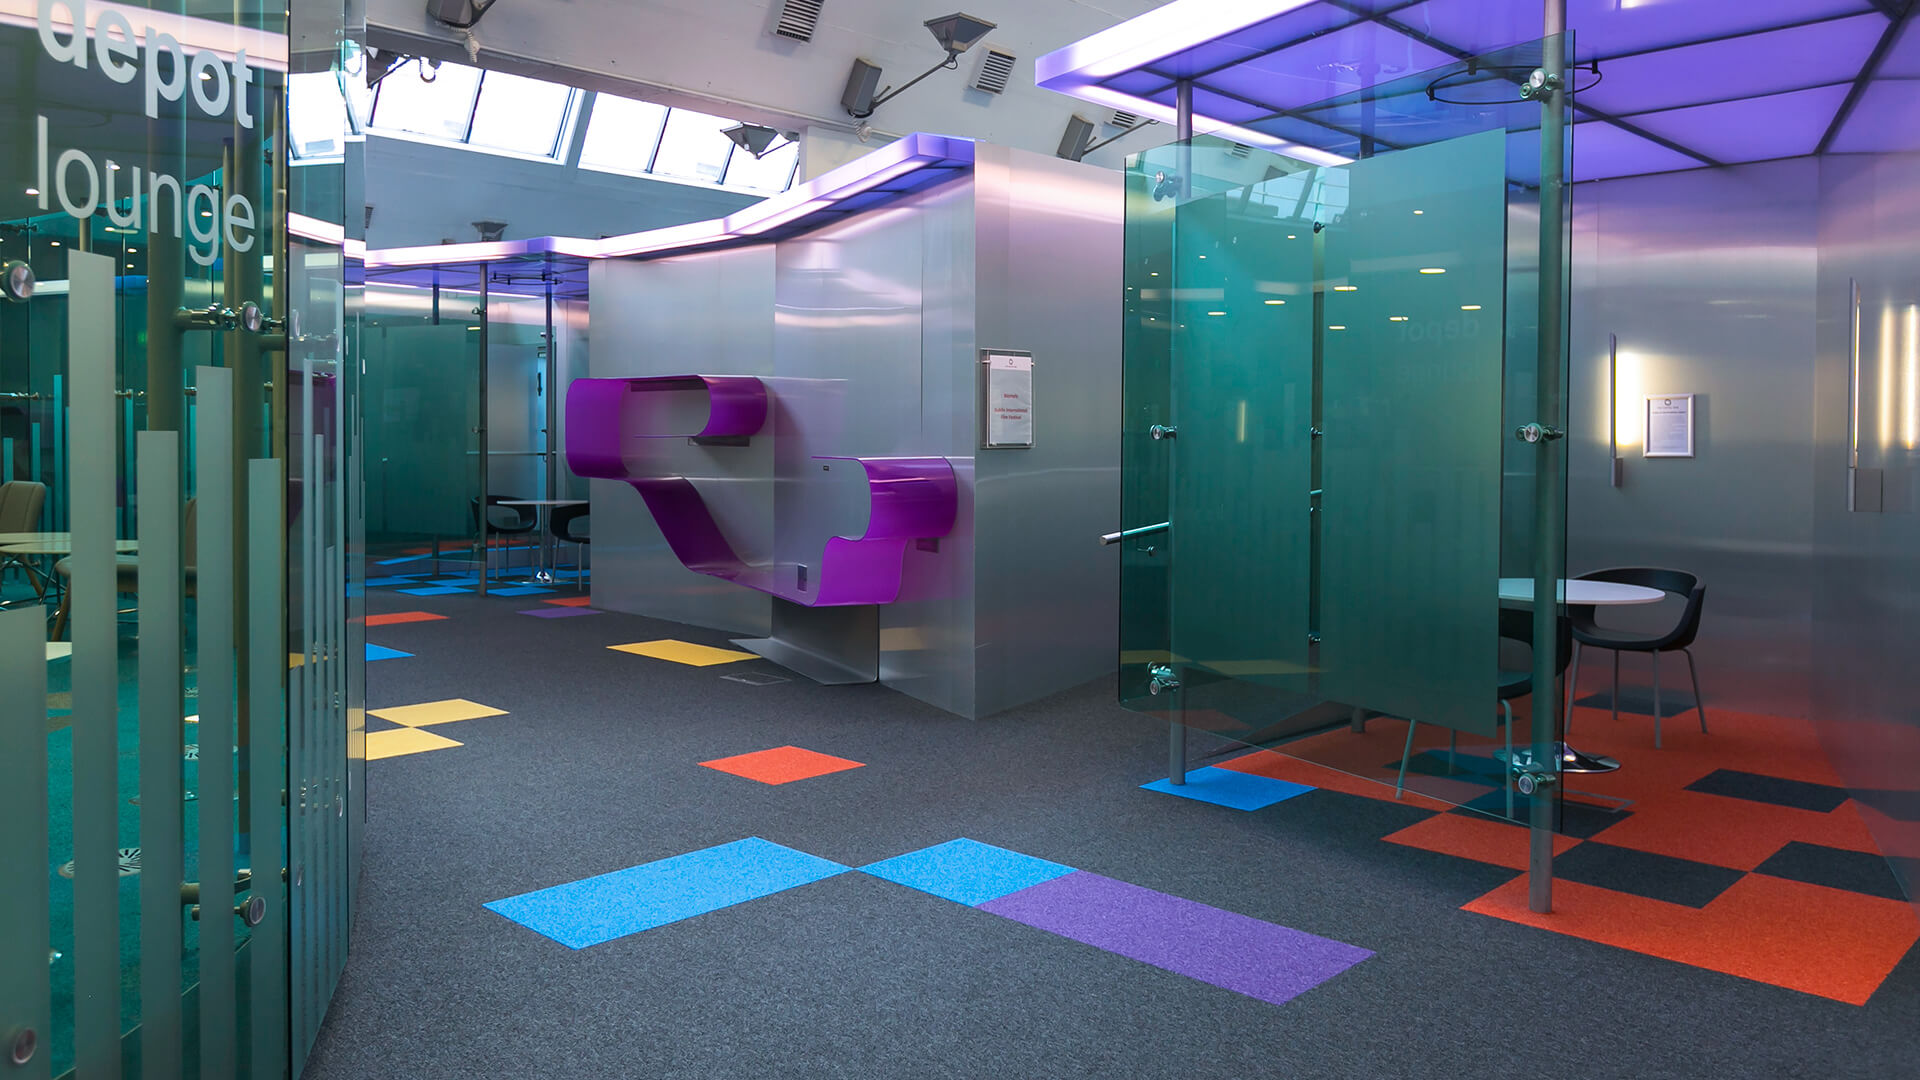 Glass partitions create intimate and informal 'breakout spaces' in the Digital Depot